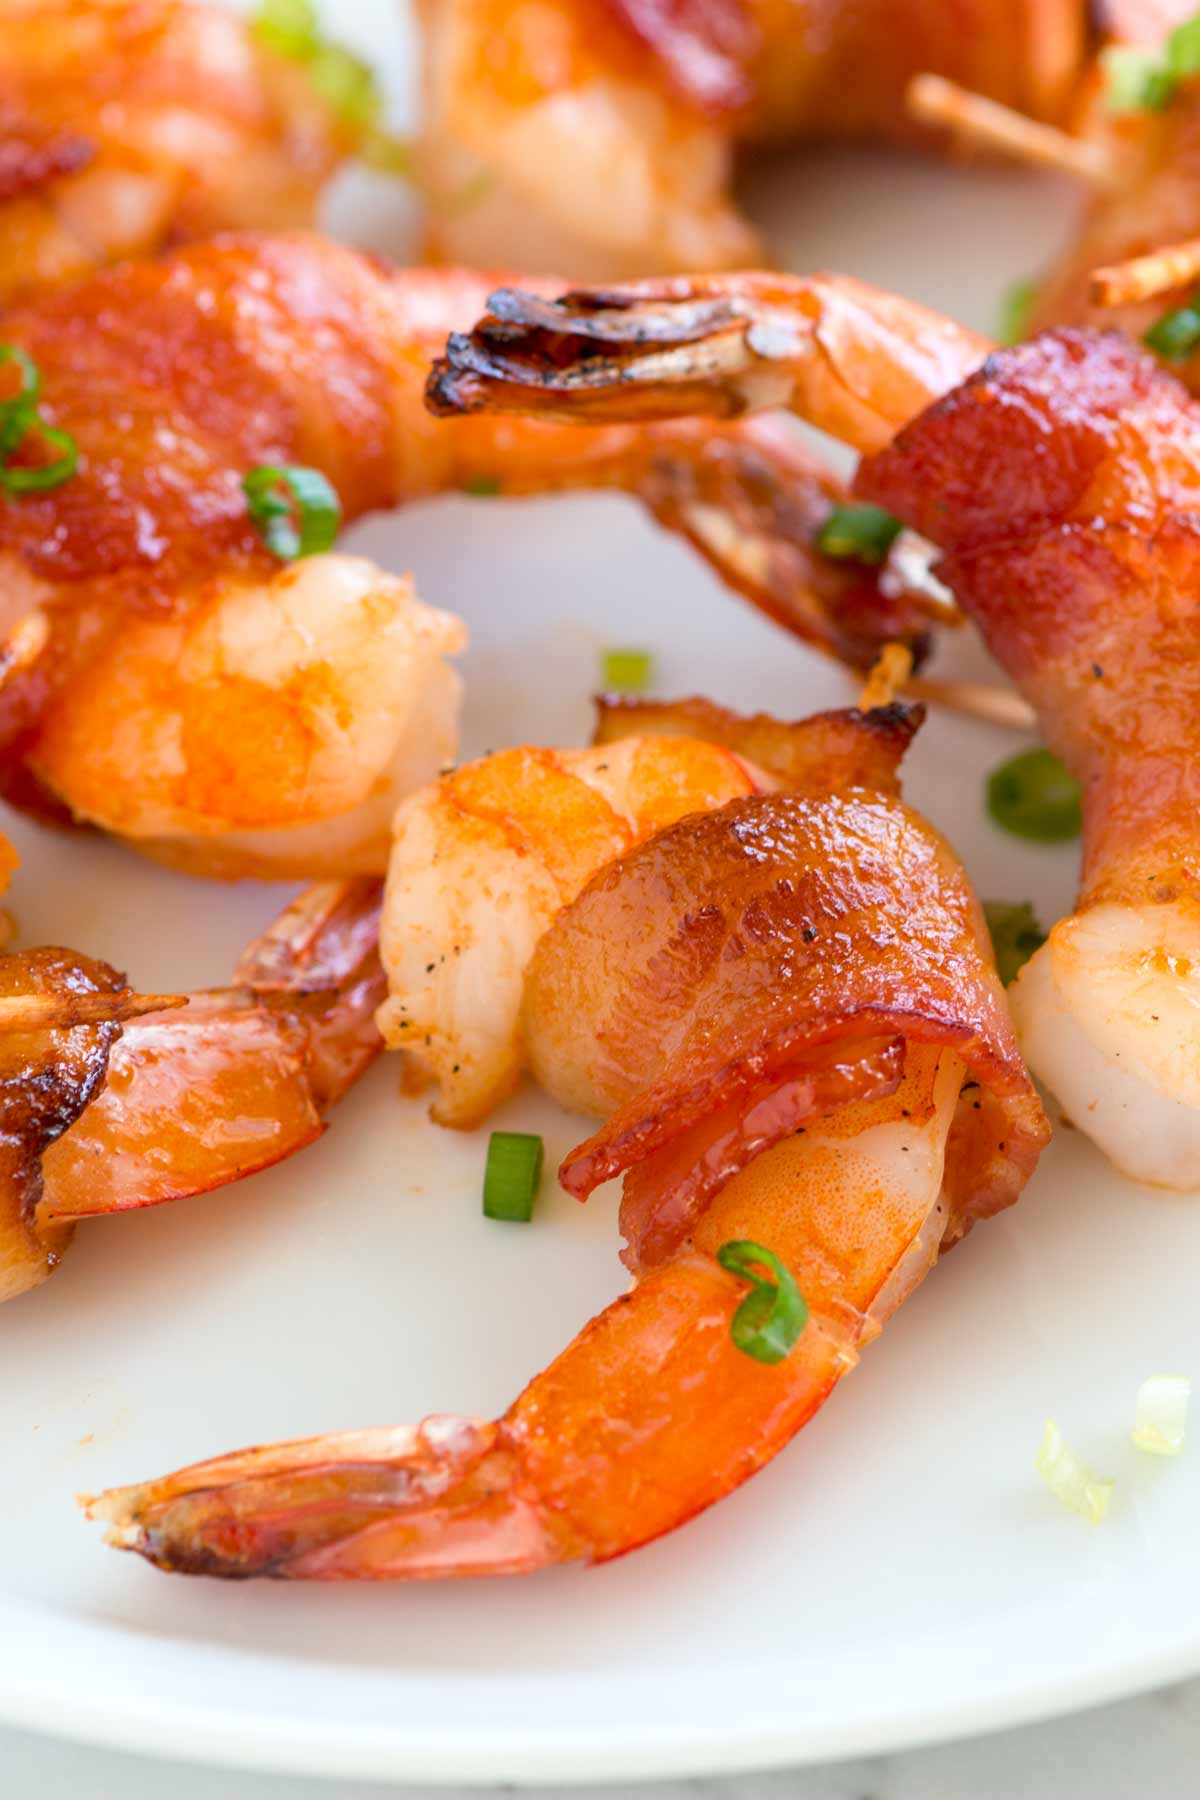 Spicy Maple Bacon Wrapped Shrimp Recipe